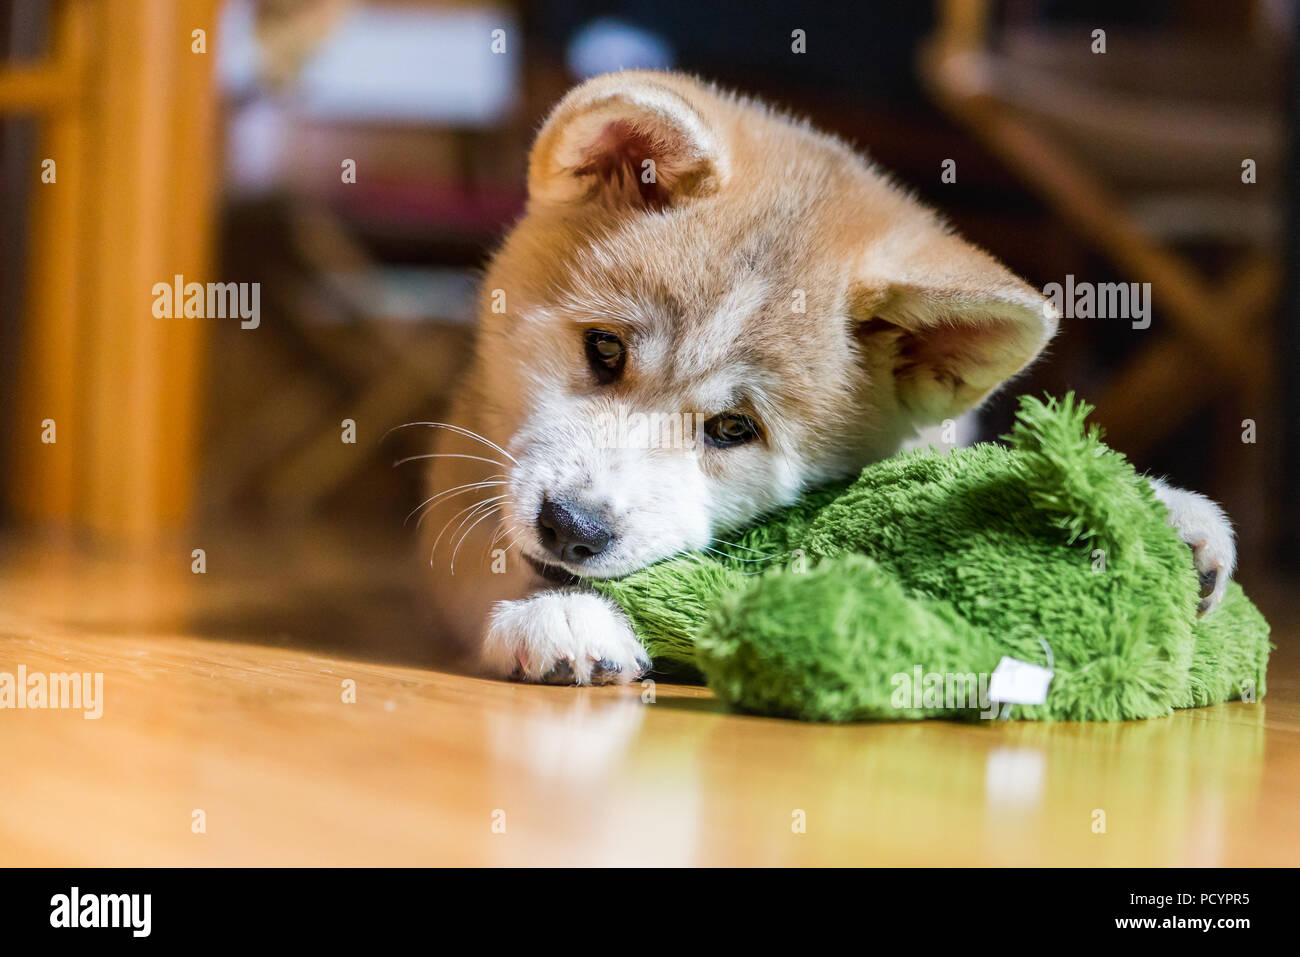 Japanese Akita Inu puppy, white and red dog close up chewing a toy Stock Photo